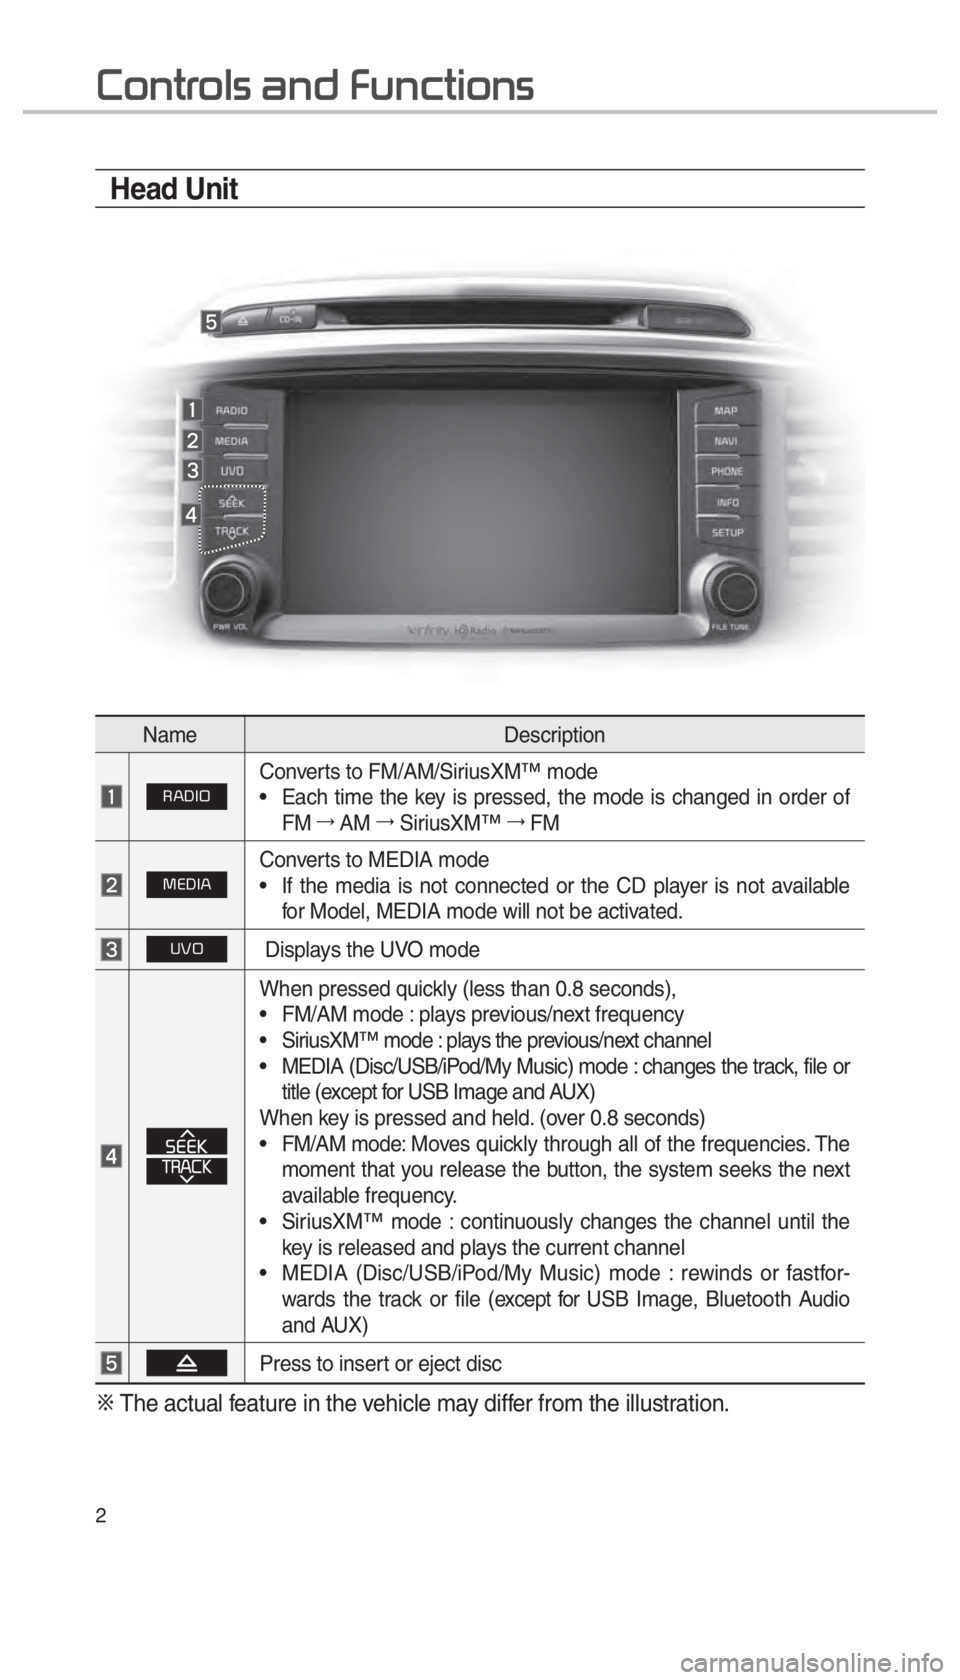 KIA SORENTO 2018  Navigation System Quick Reference Guide 2
002600520051005700550052004F00560003004400510047000300290058005100460057004C005200510056
NameDescription
 003500240027002C0032Converts to FM/AM/SiriusXM™ mode 
 
• Each time the key is pressed, 